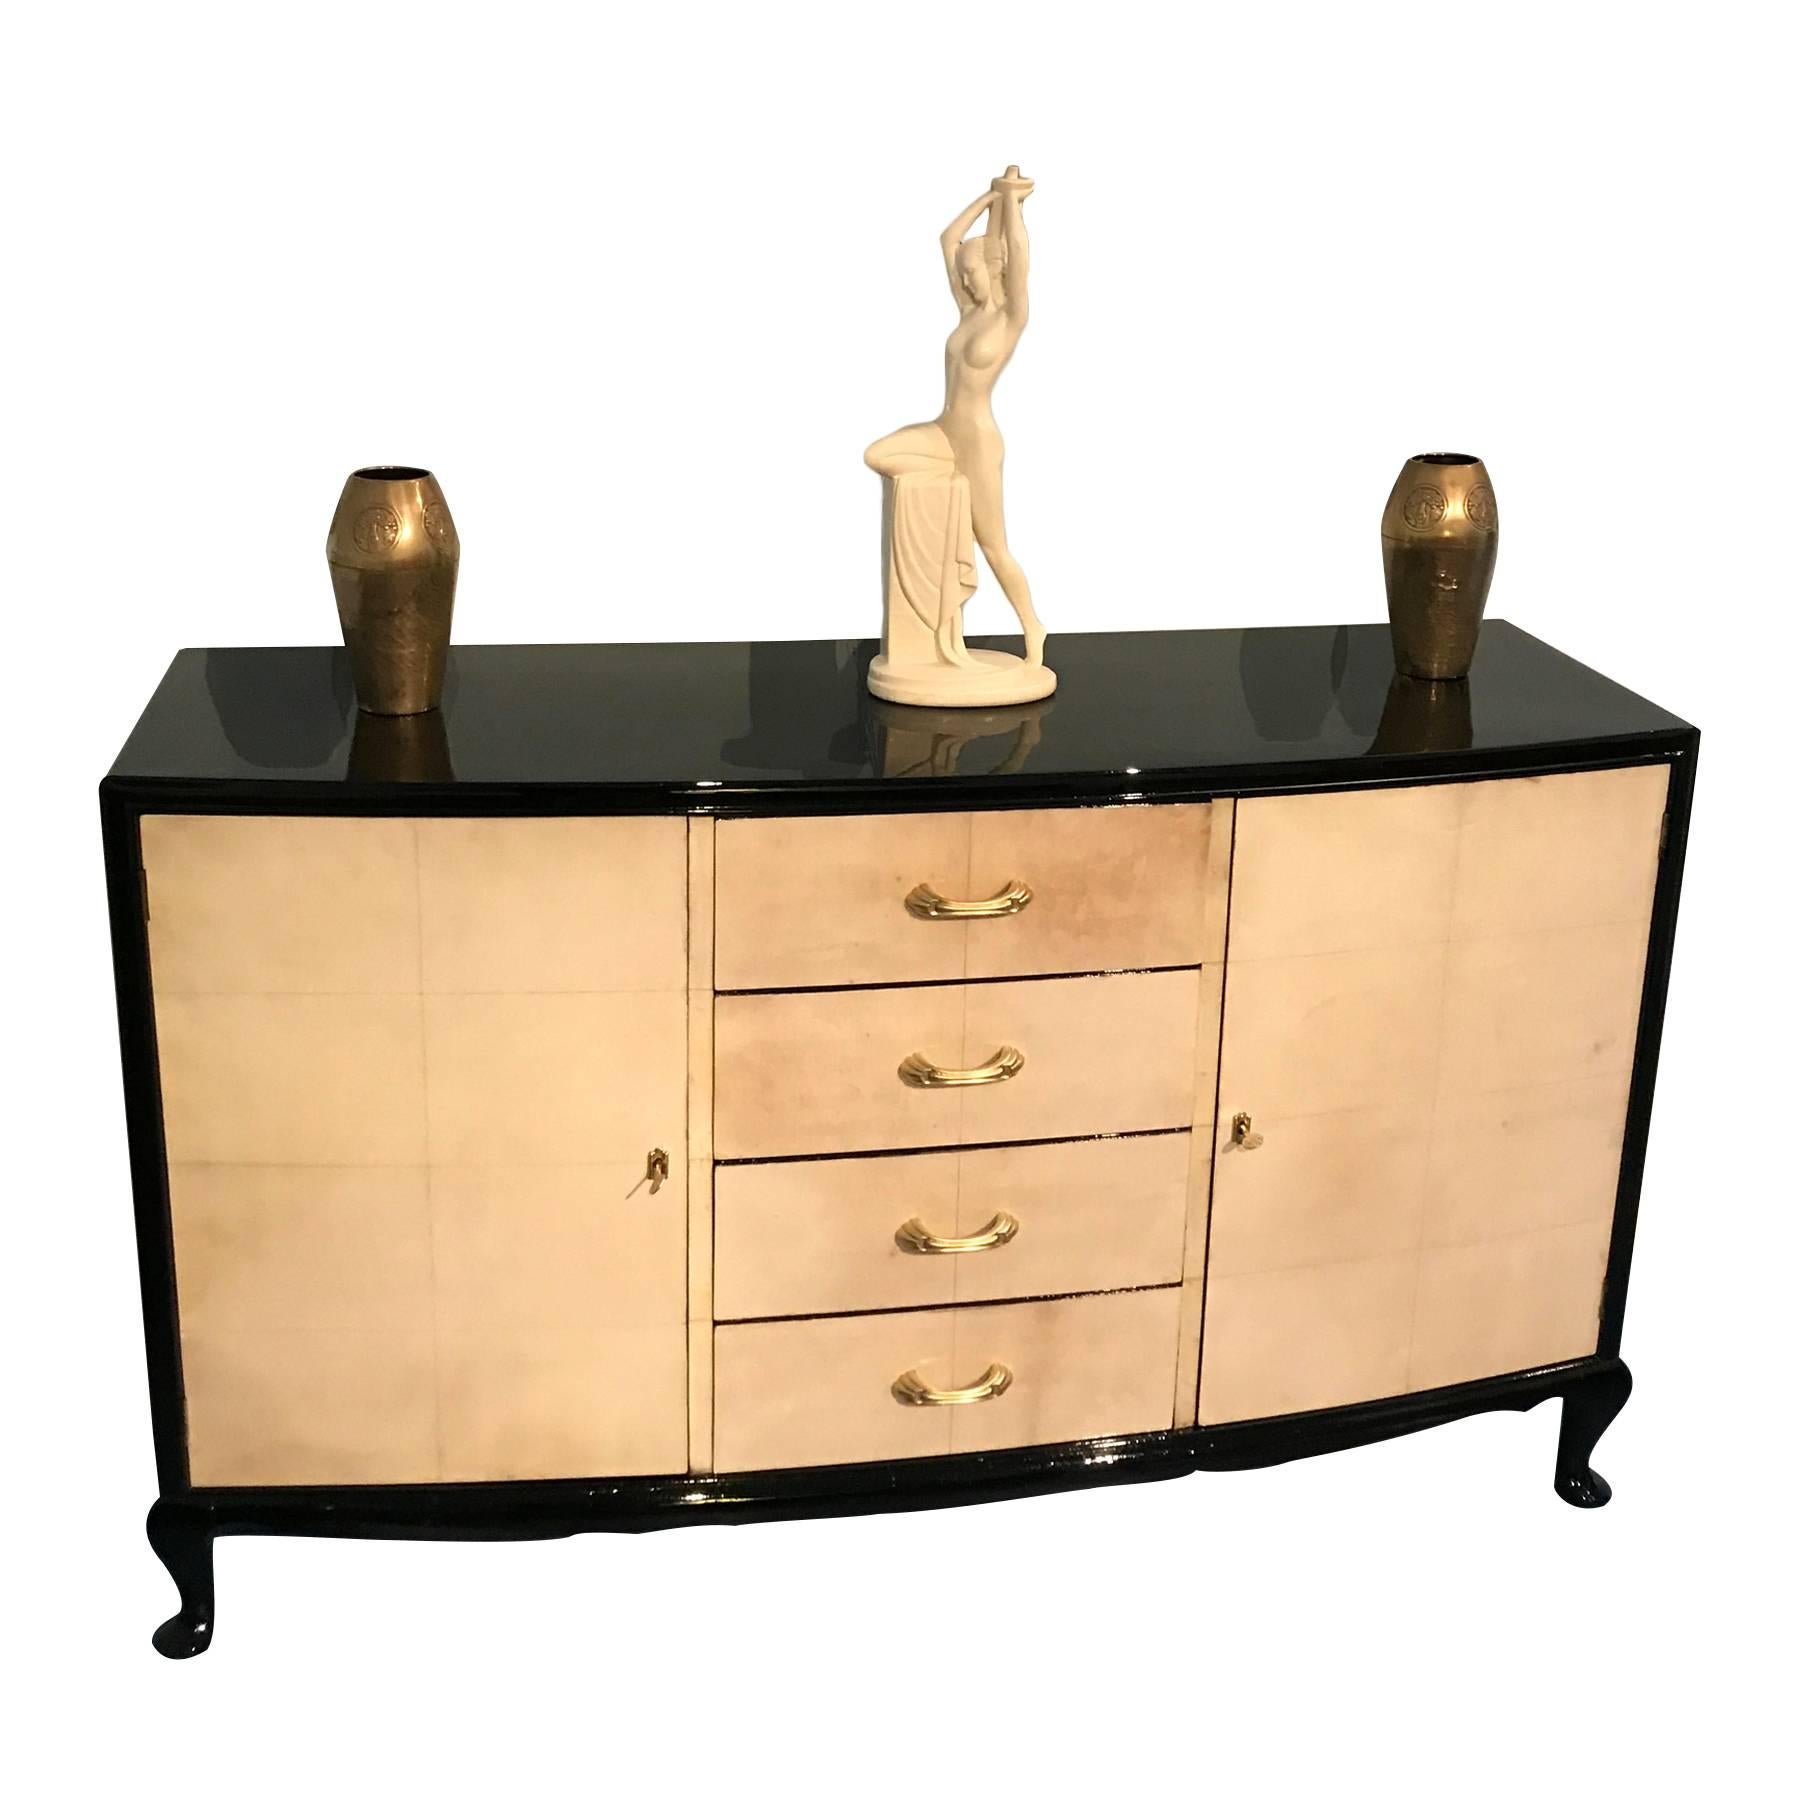 Elegant French Art Deco parchment sideboard manufactured in France in the 1950s.
Beautiful oriental line base, black lacquered side, top and legs.
Clear lines and a simple but stylish shape.
Completely restored.